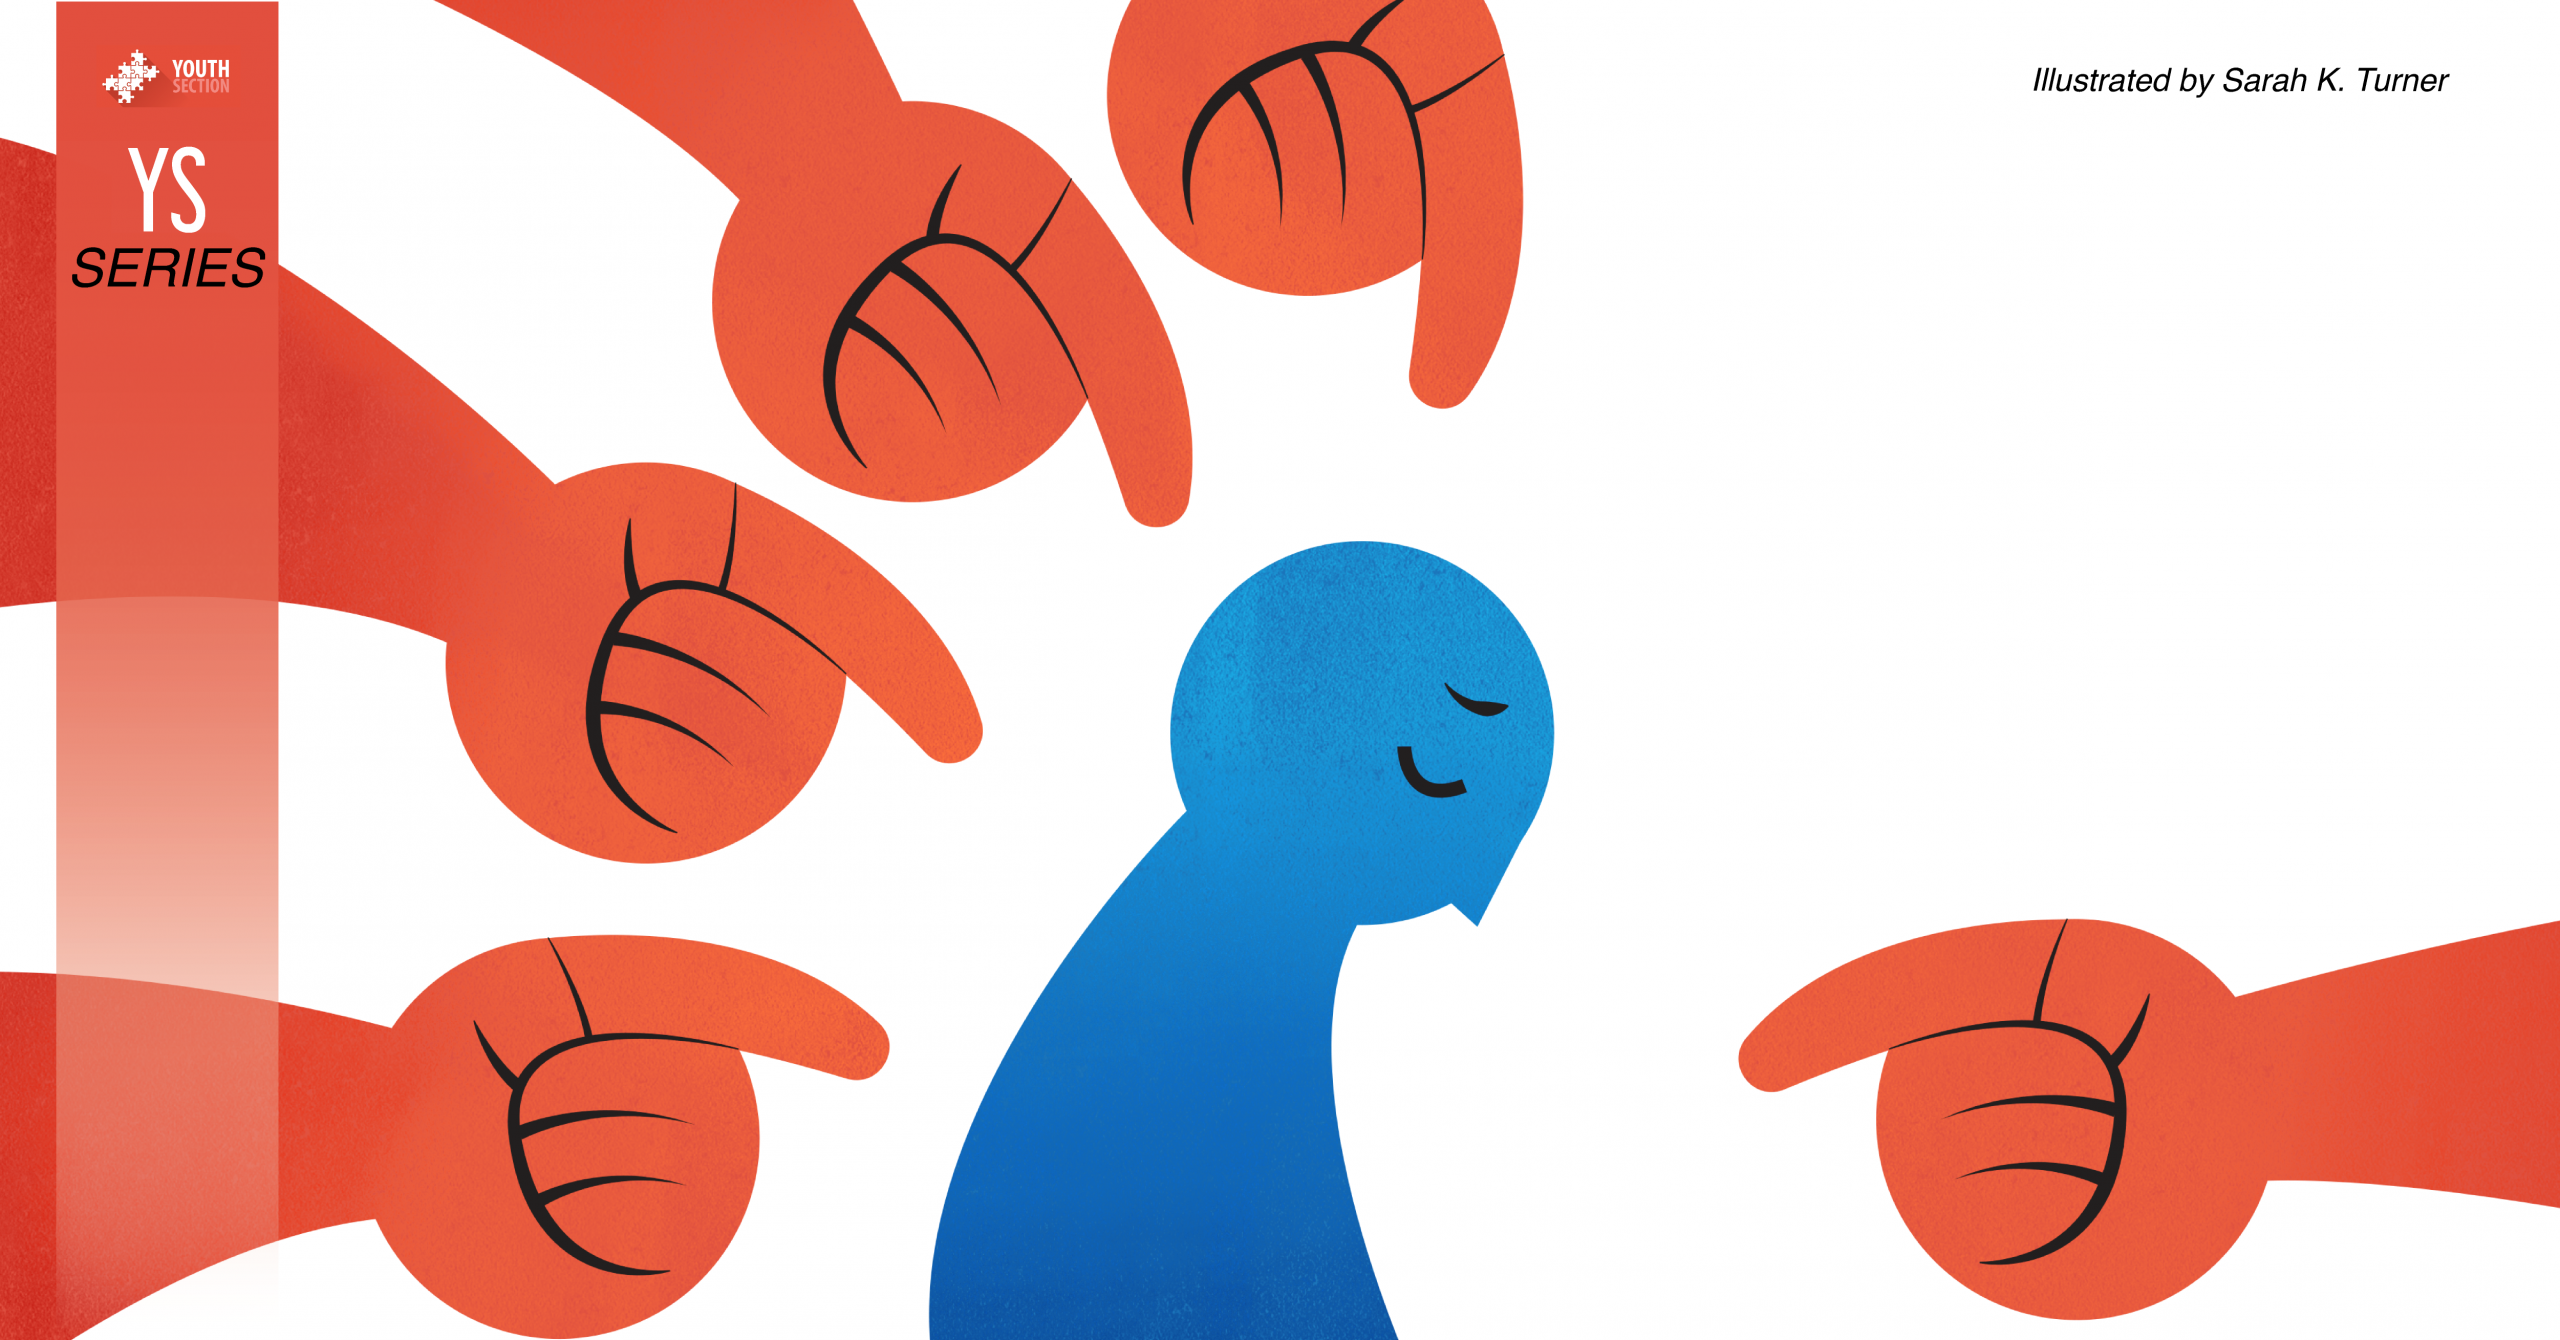 Illustration of five hands pointing to a slumped over, sad figure, representing bullying.